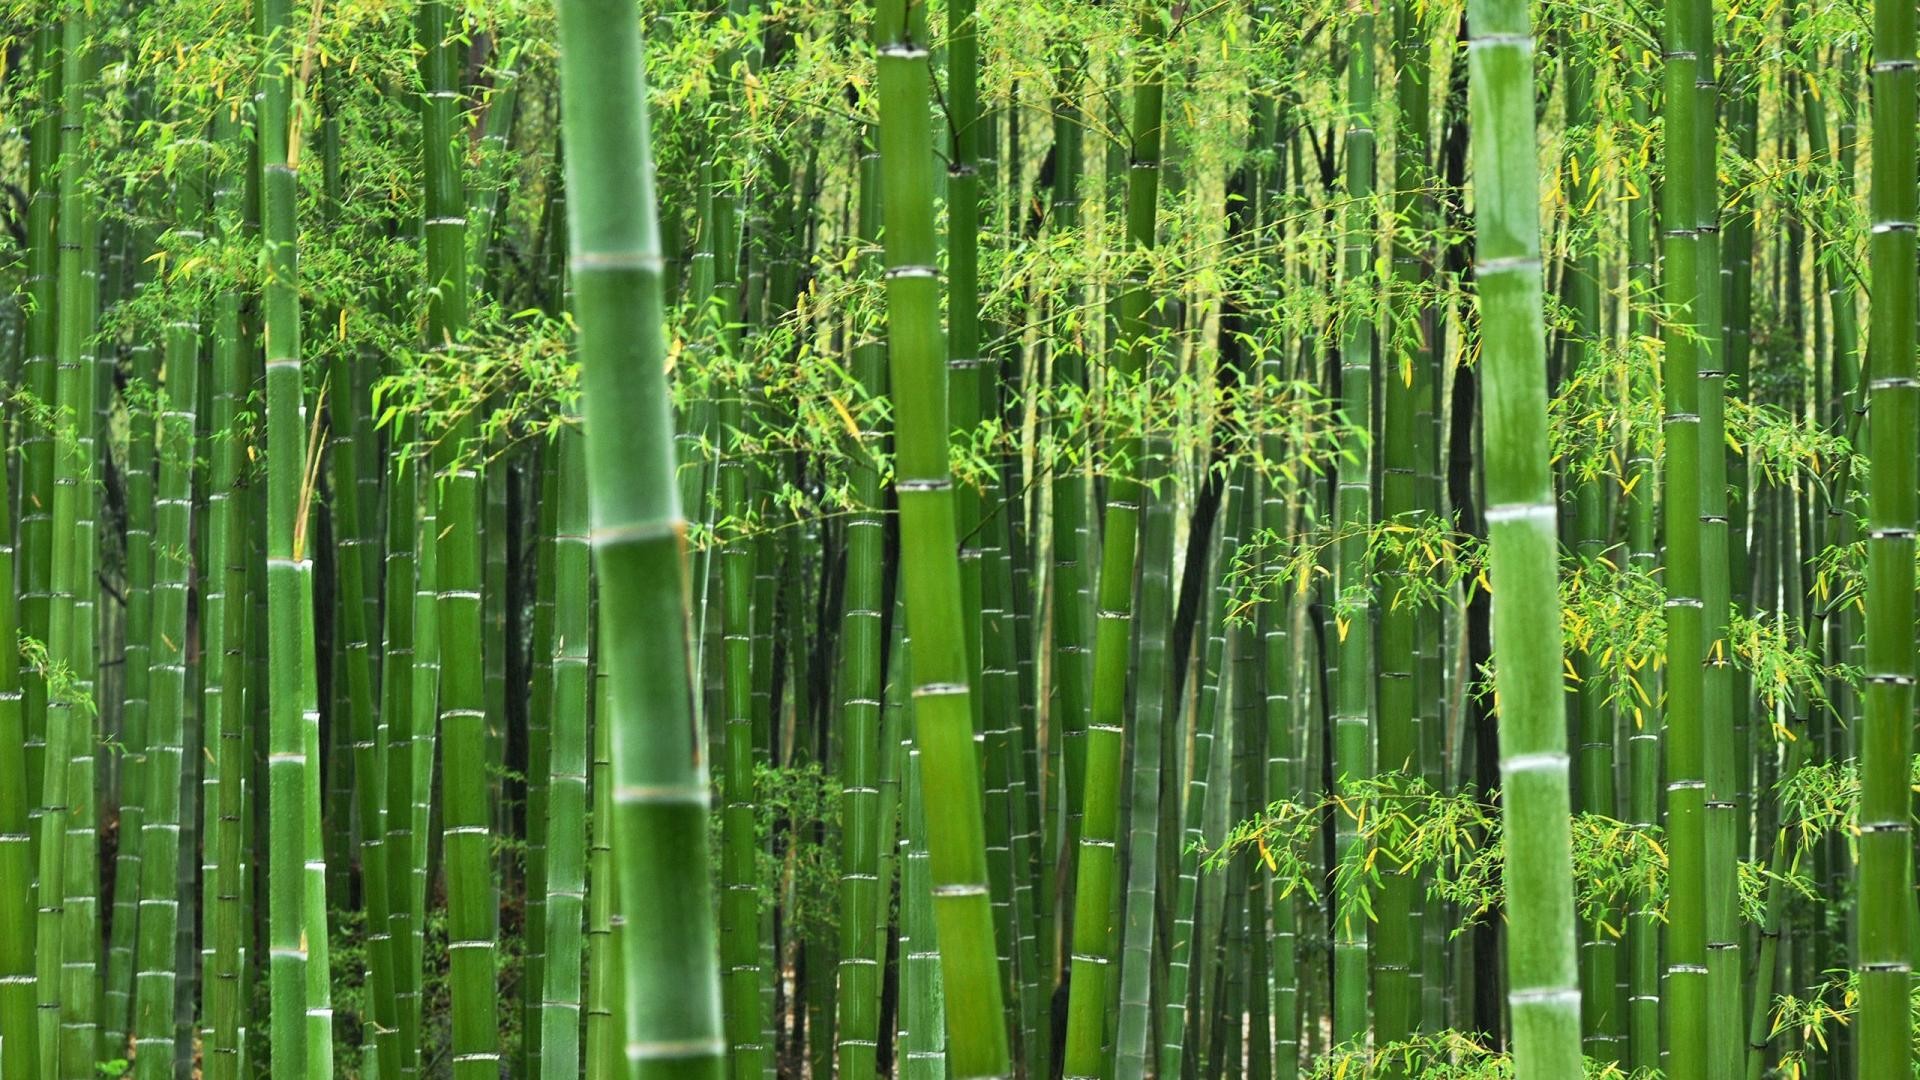 Green Bamboo Forest Sunlight Large Wall Mural Self-adhesive - Etsy